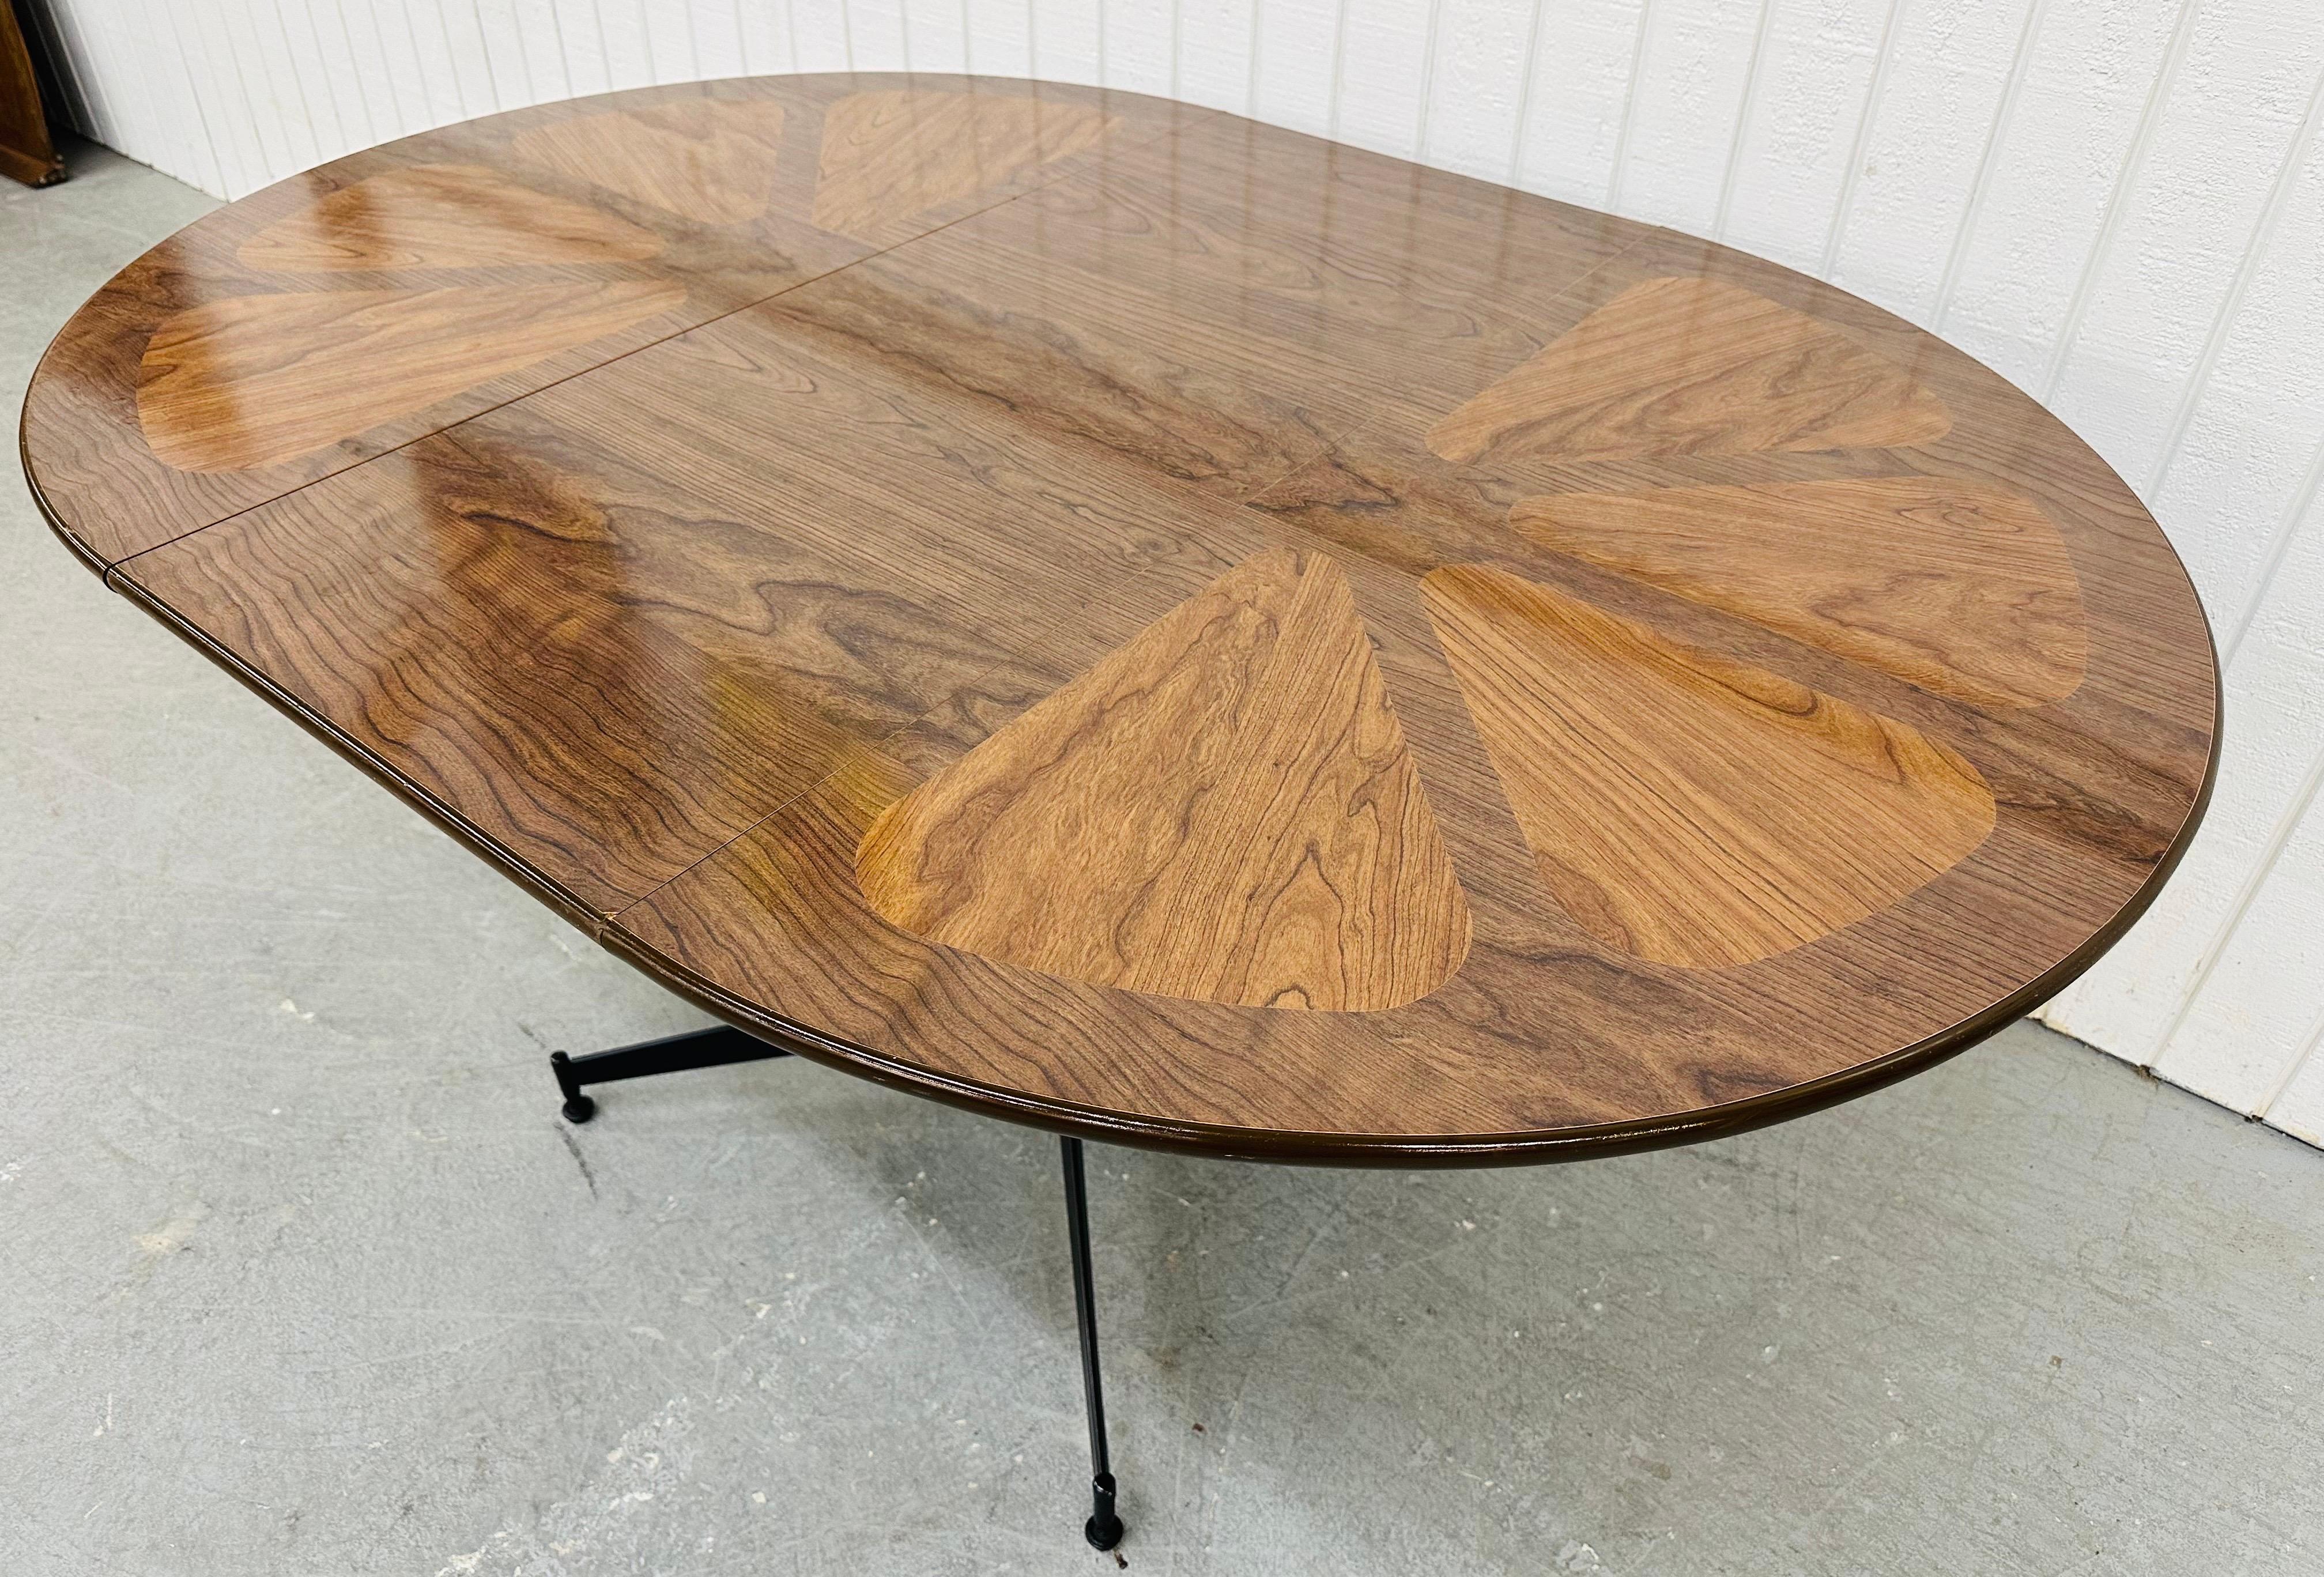 This listing is for a Mid-Century Modern Brody Walnut Dining Set. Featuring a laminated walnut round table that expands to 59” L with one leaf, black metal base, four swivel dining chairs with walnut backs, leather cushions, and black metal legs.